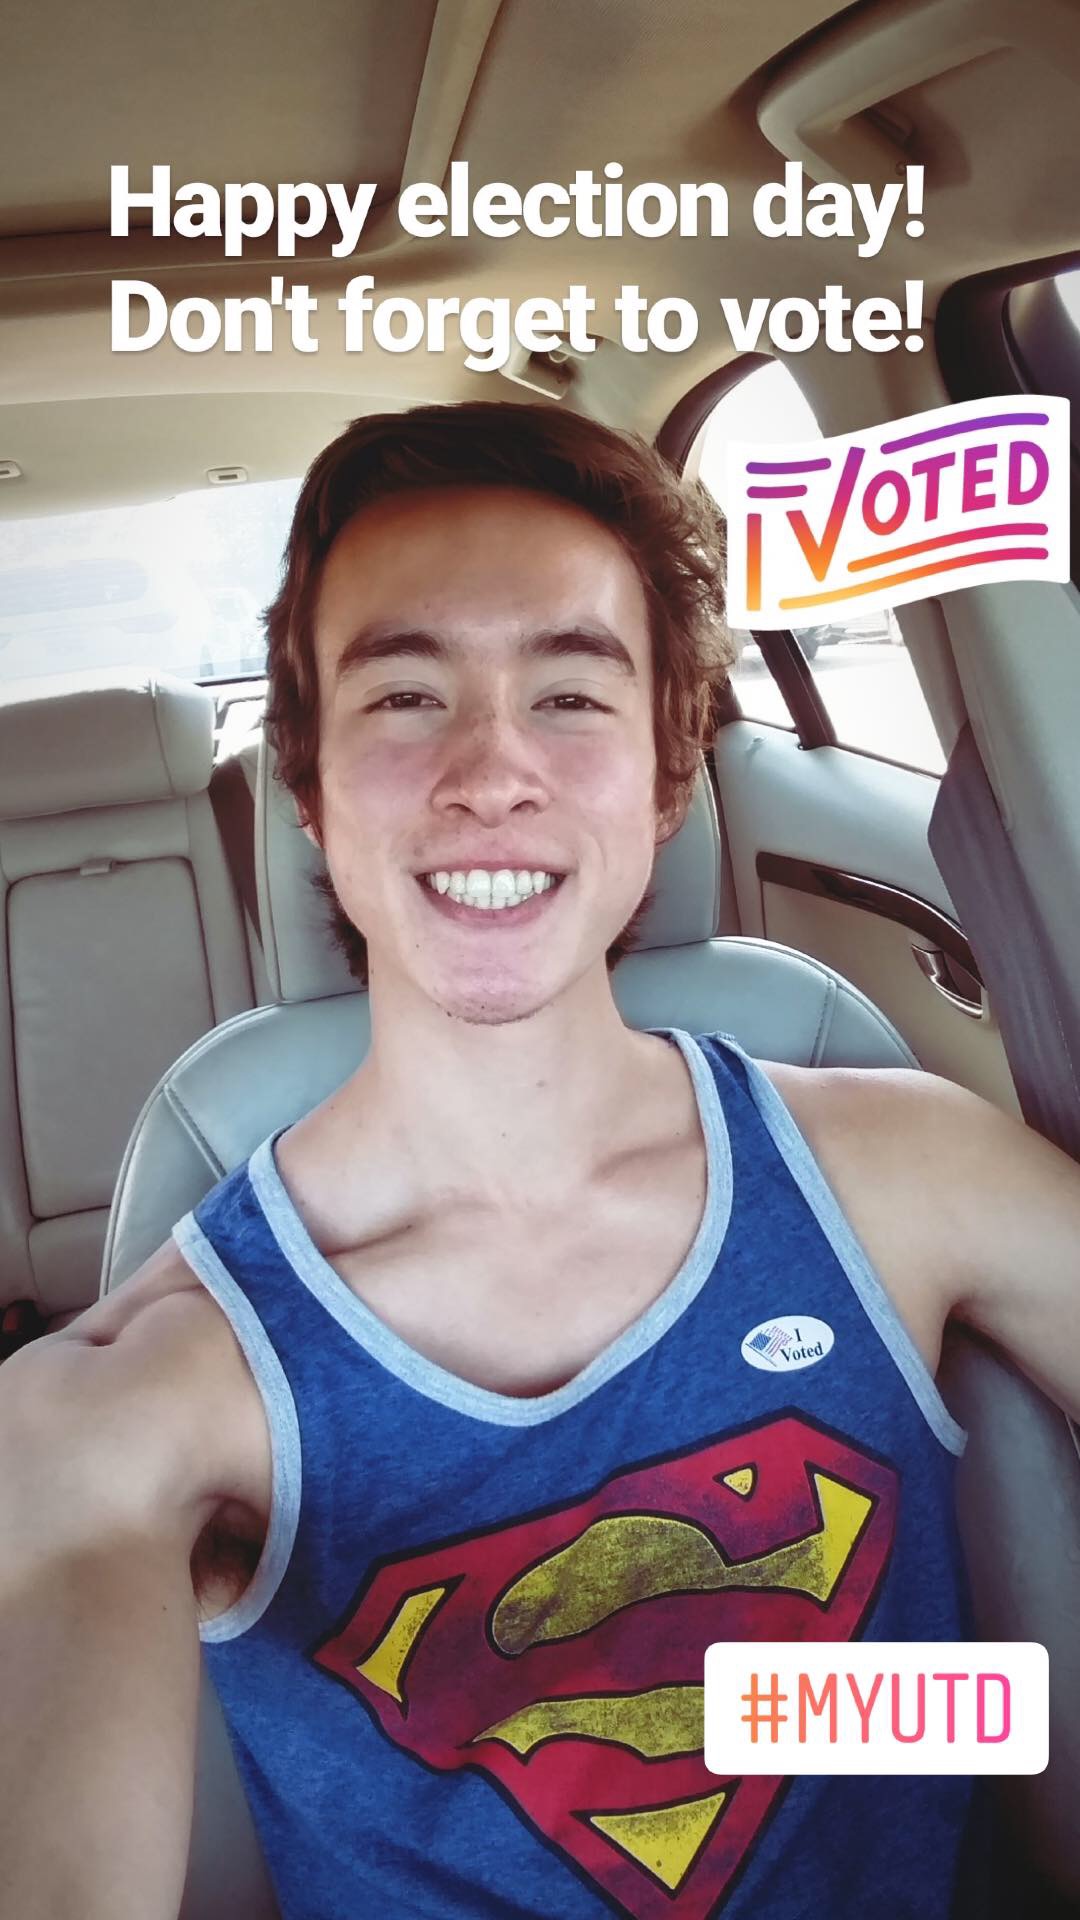 Selfie of Charlie in the car wearing an I Voted sticker.